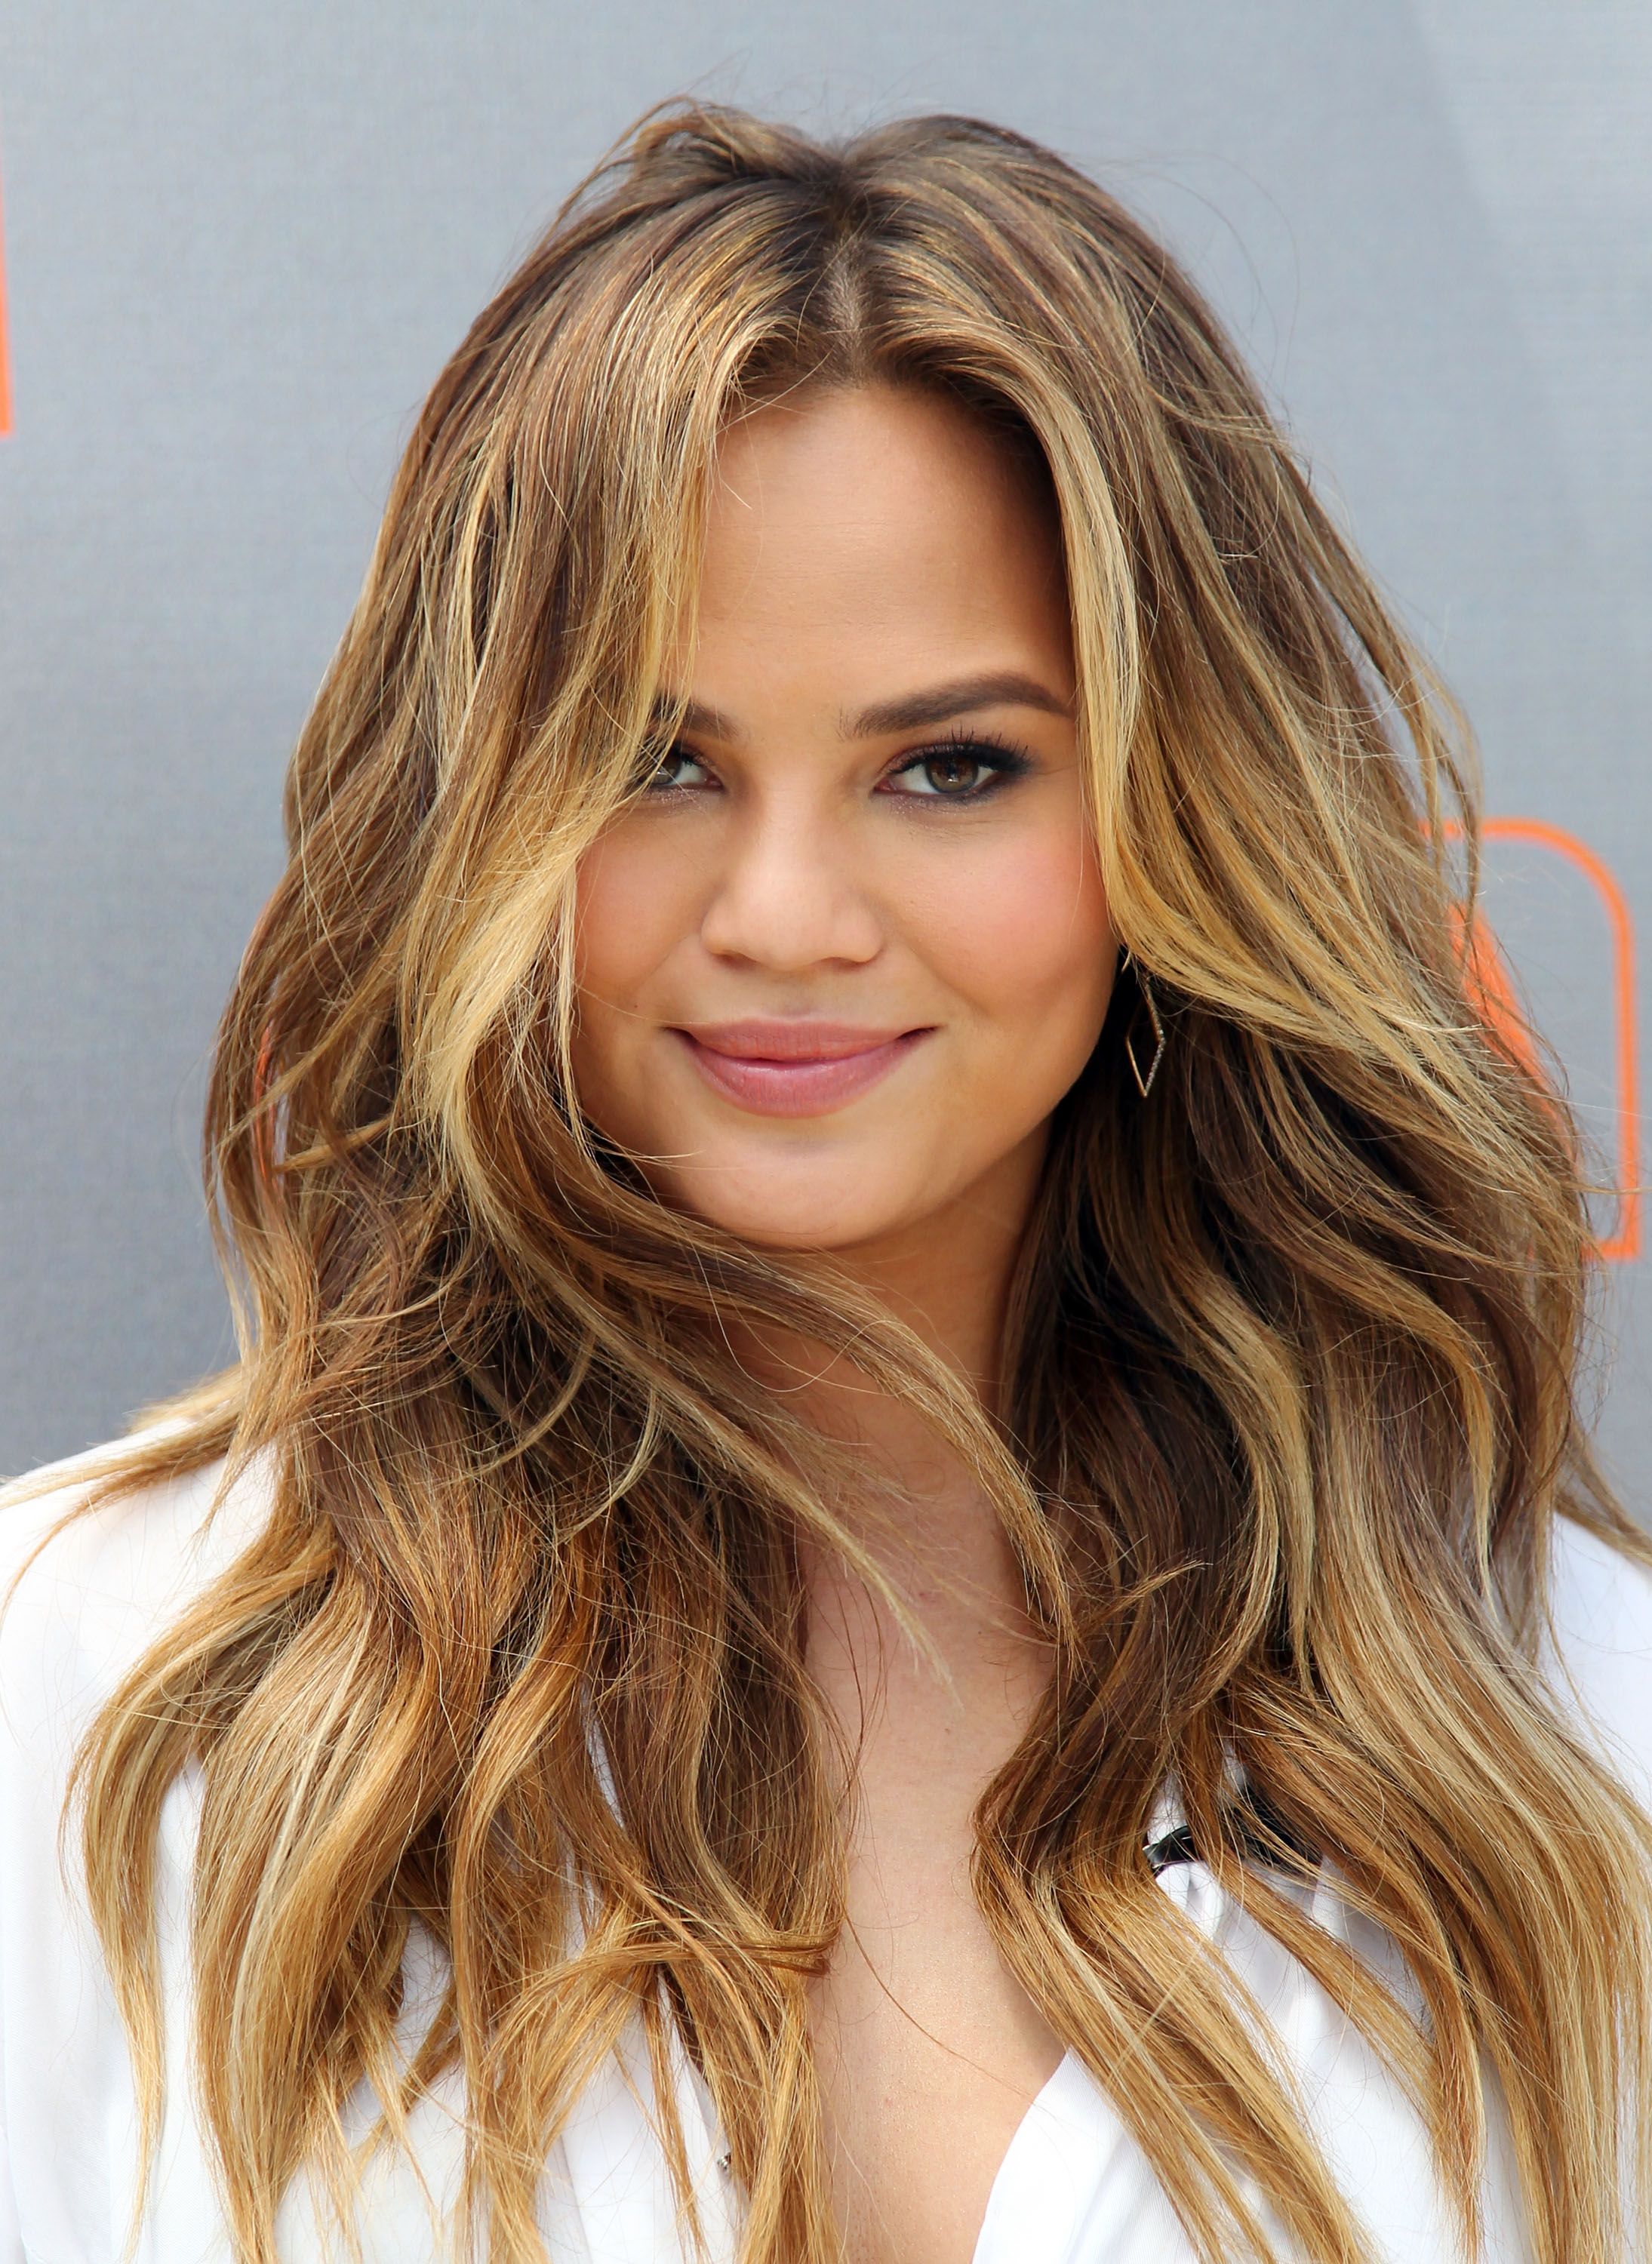 14 Celebrity Beach Waves Hair Looks You'll Want to Copy Stat | Beach ...